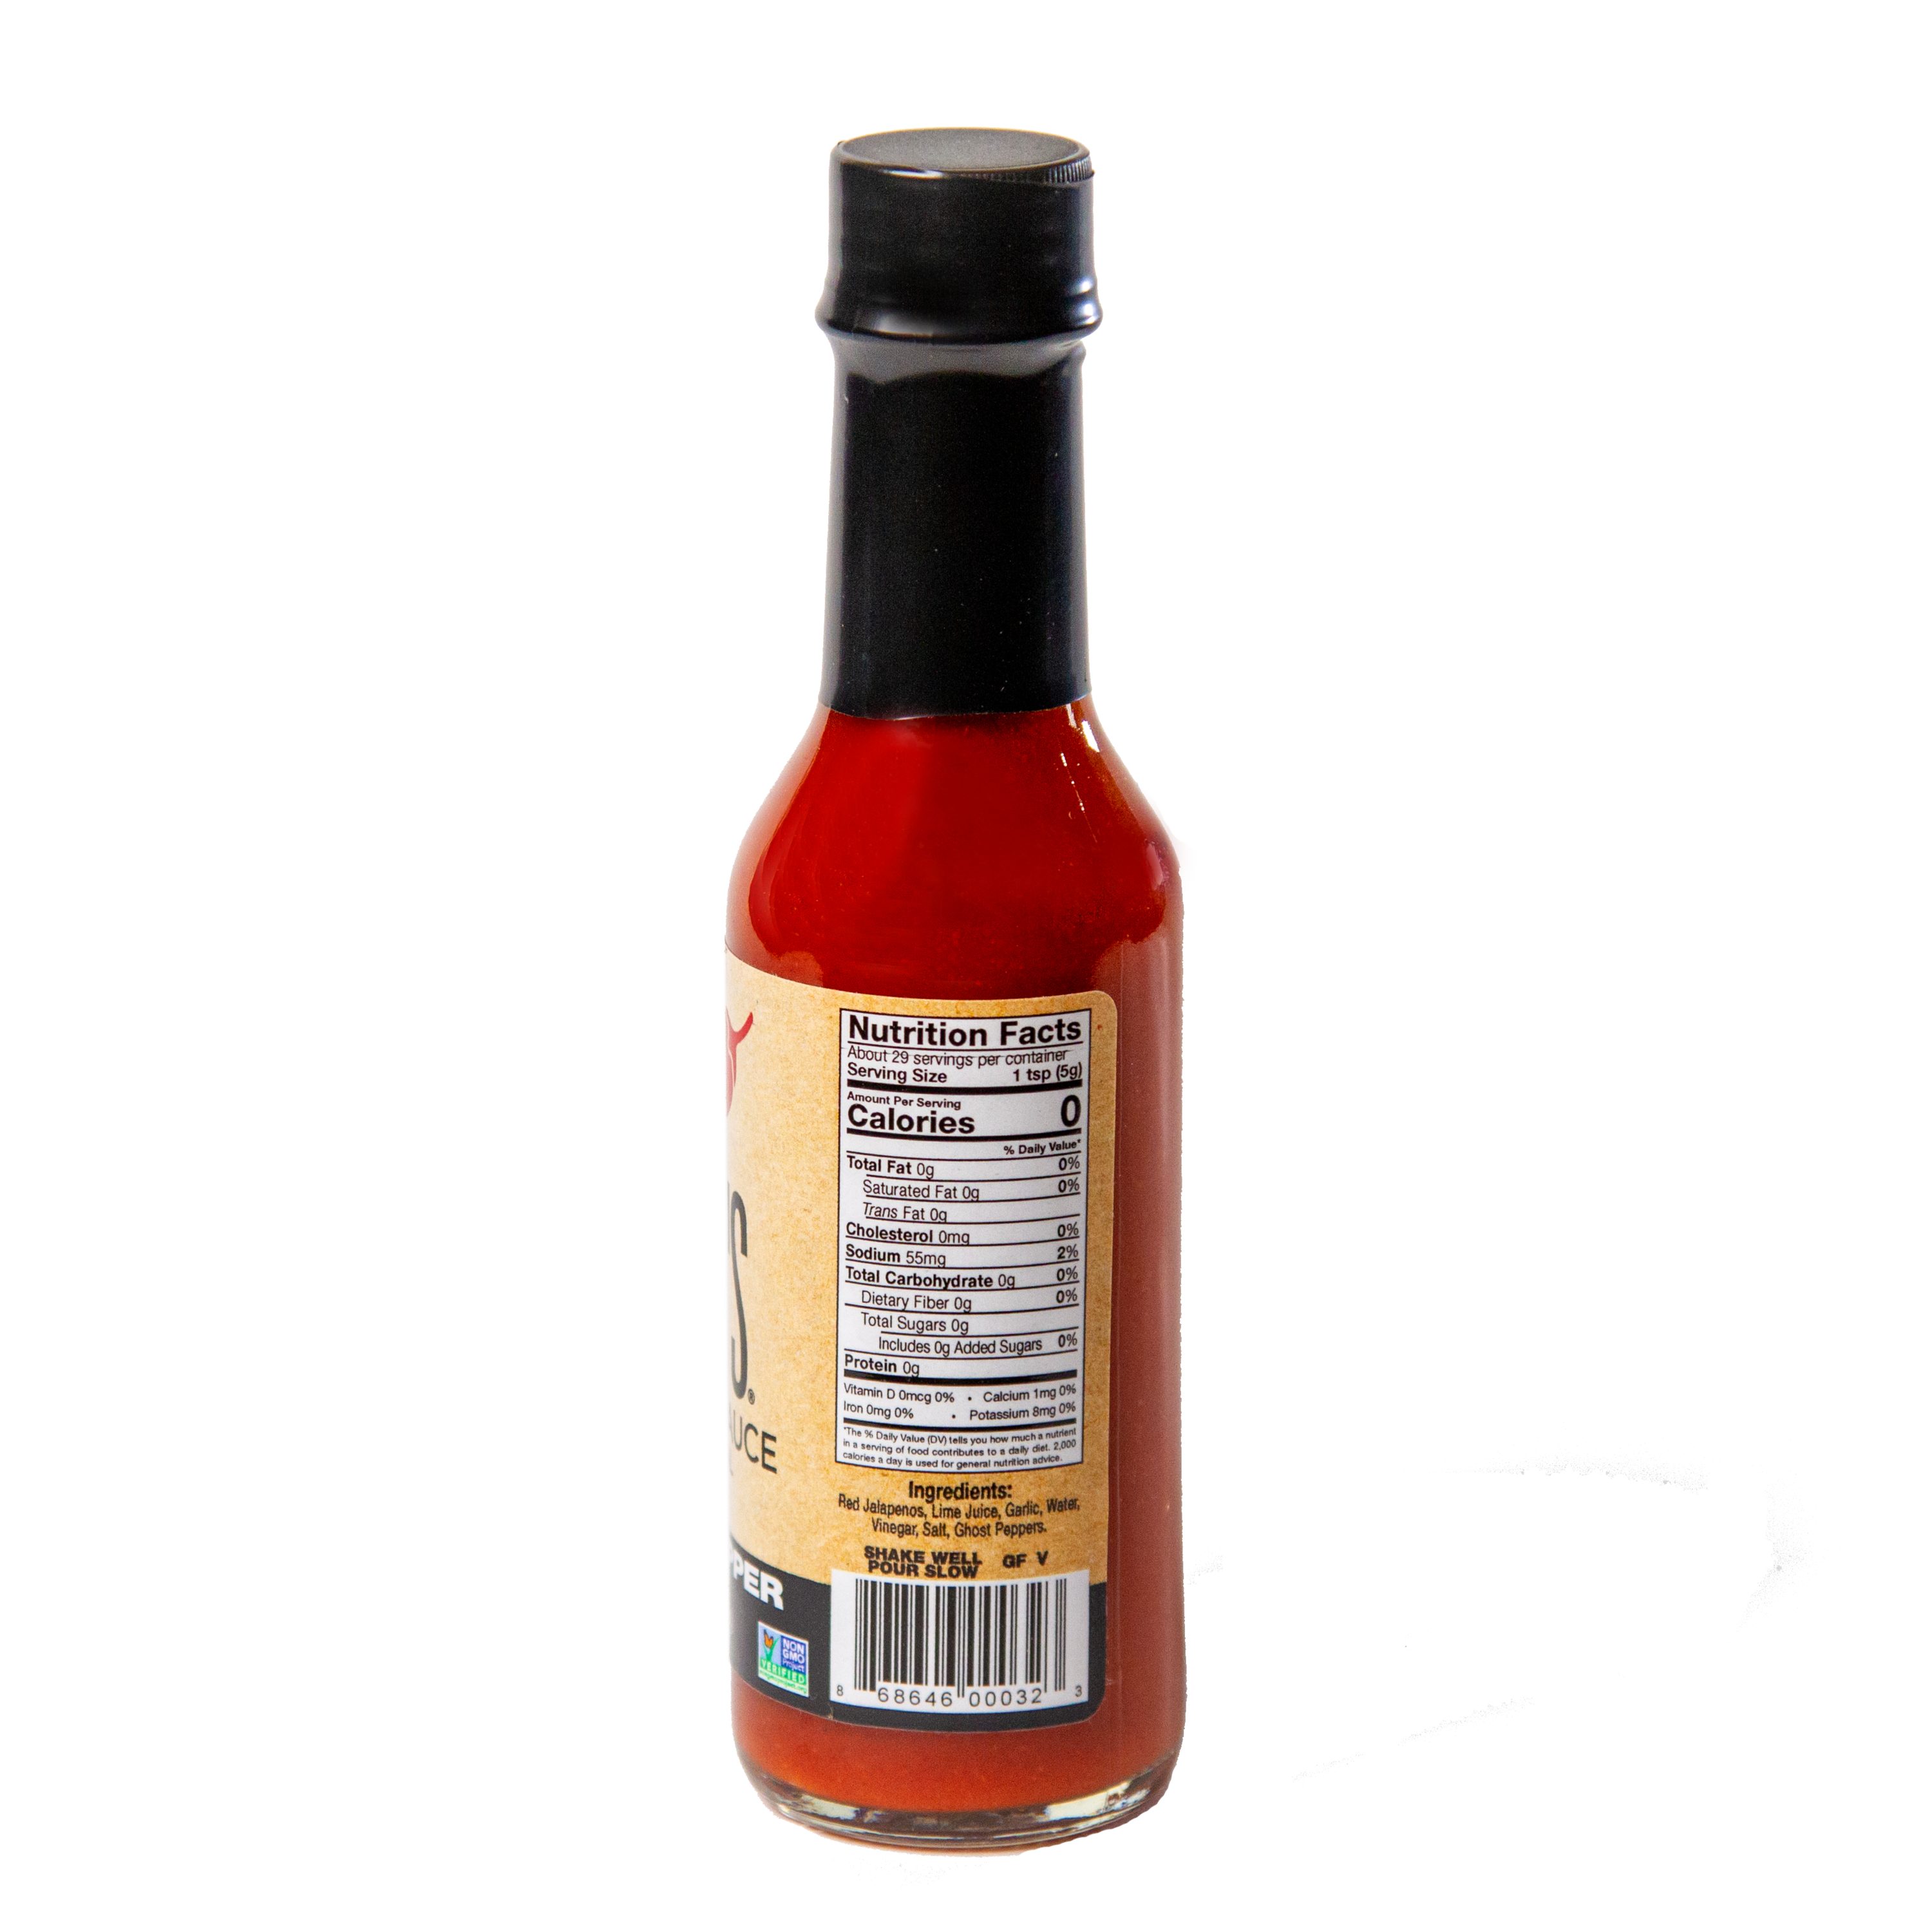  Cajun Chef Green Louisiana Hot Sauce 3 oz (Pack of 1) - Mild  and Flavorful Pepper Sauce - Add Authentic Cajun Flavor - Perfect for  Sprinkling on Seafood and Meat after